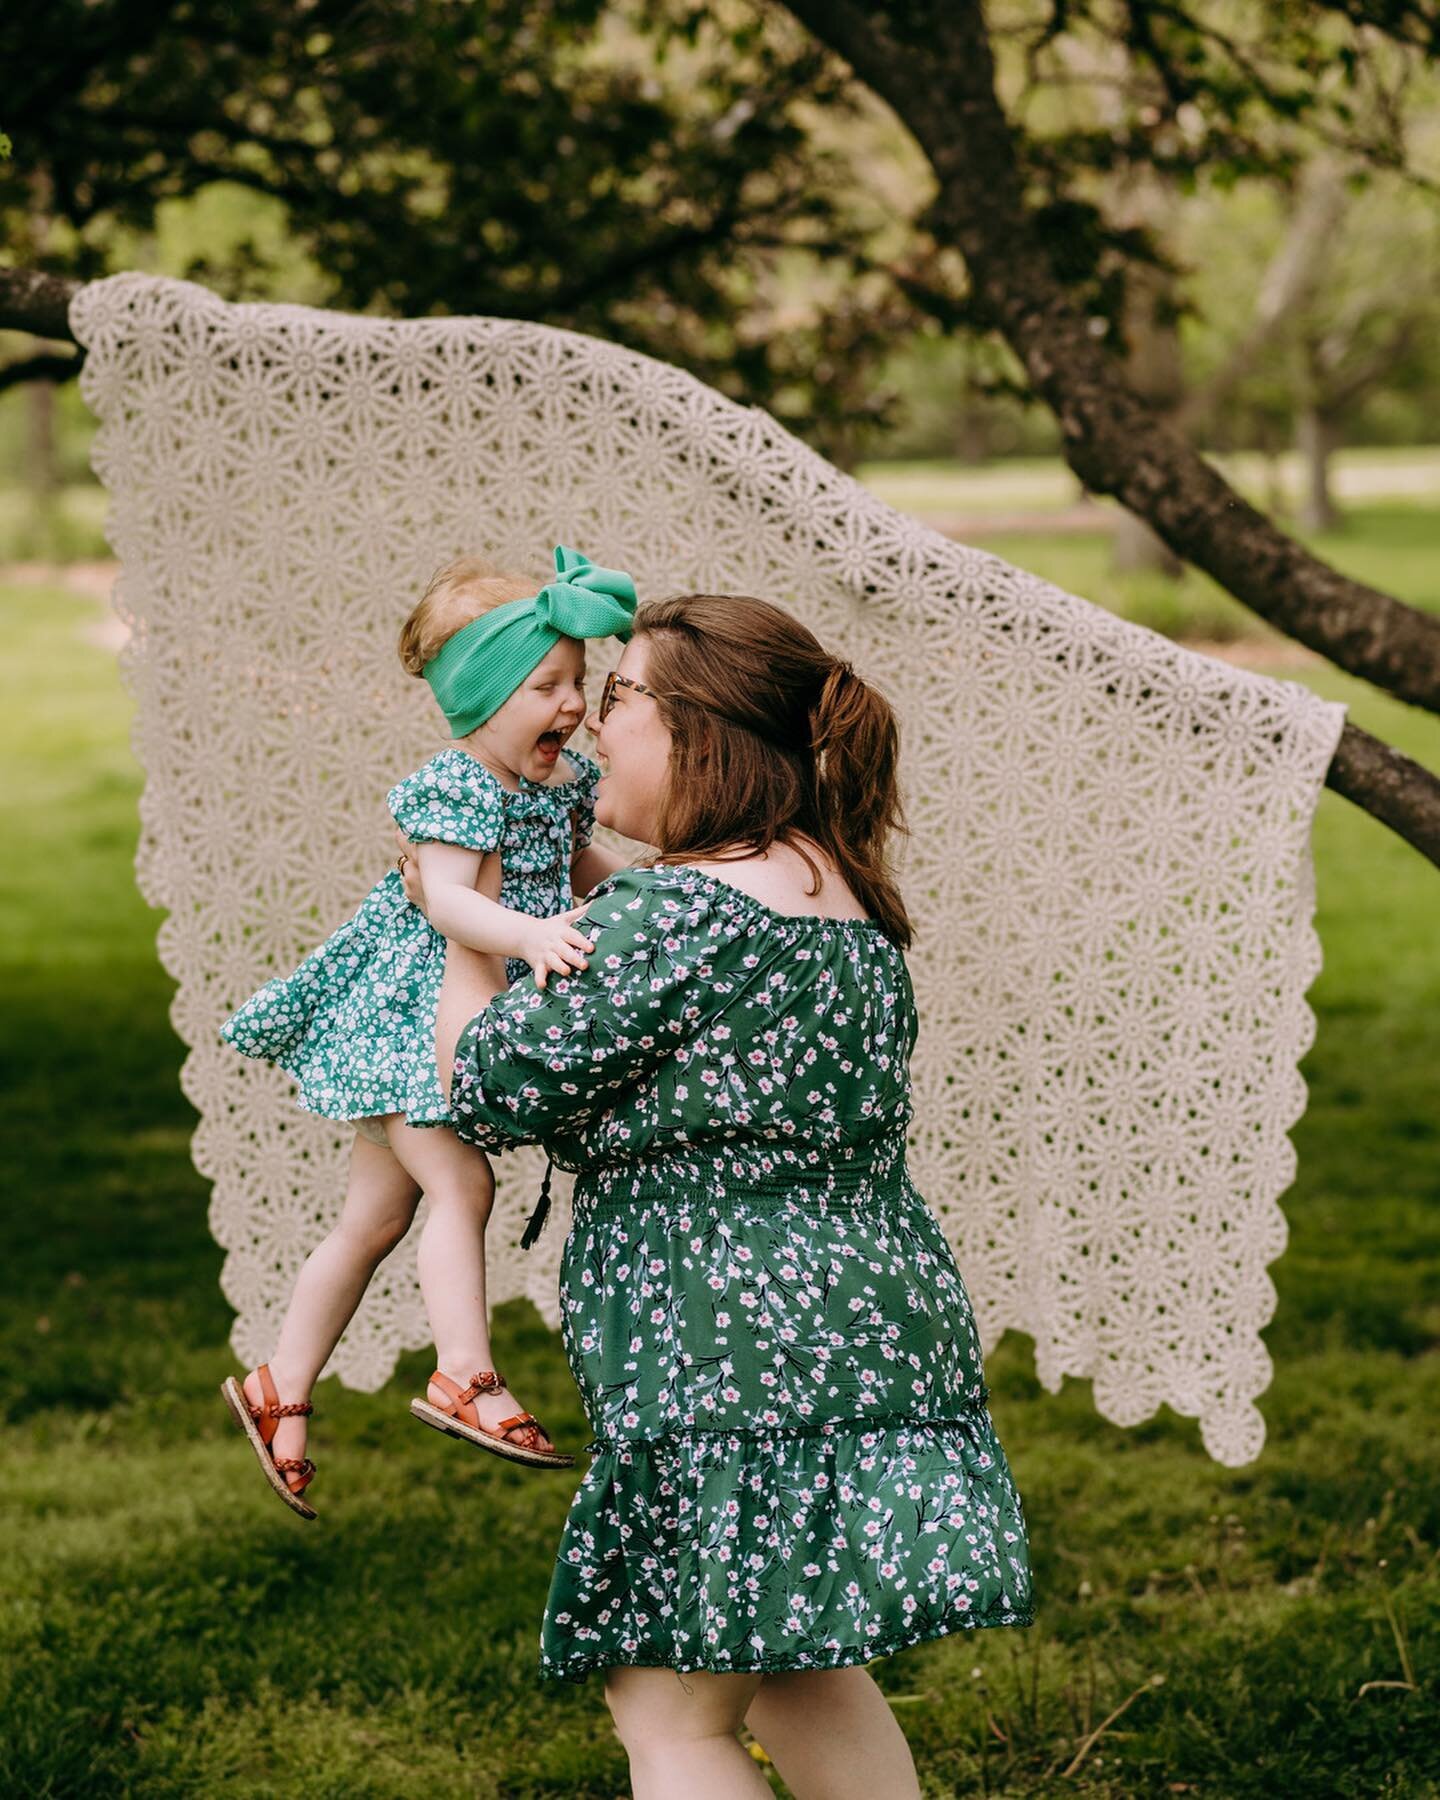 Capturing the love and joy between mommies and their little ones is what makes my heart sing! &hearts;️
⠀⠀⠀⠀⠀⠀⠀⠀⠀
Thank you to all the amazing moms who joined me for Mommy&amp;Me minis - your love for your babies is truly magical ✨ 
⠀⠀⠀⠀⠀⠀⠀⠀⠀
KENDRA&